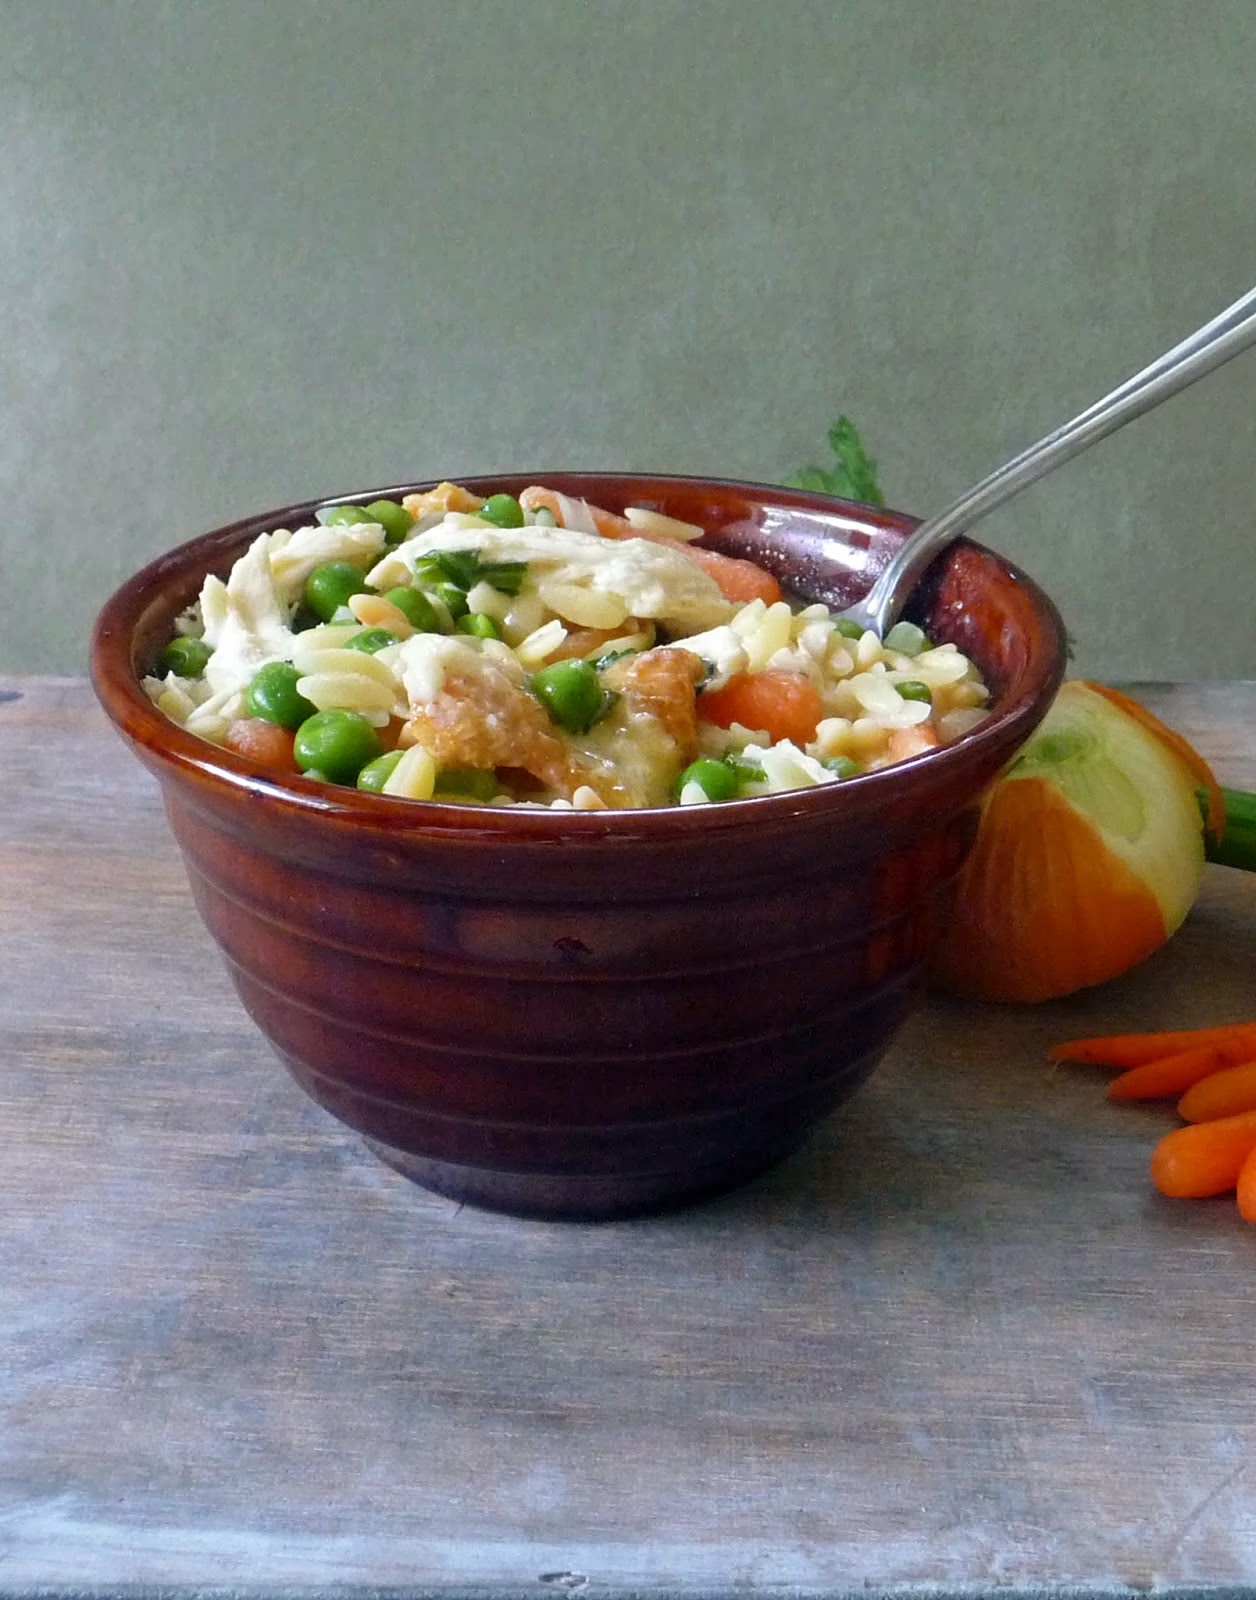 Chicken Pot Pie Pasta from What to Eat this Weekend Roundup on Anyonita Nibbles